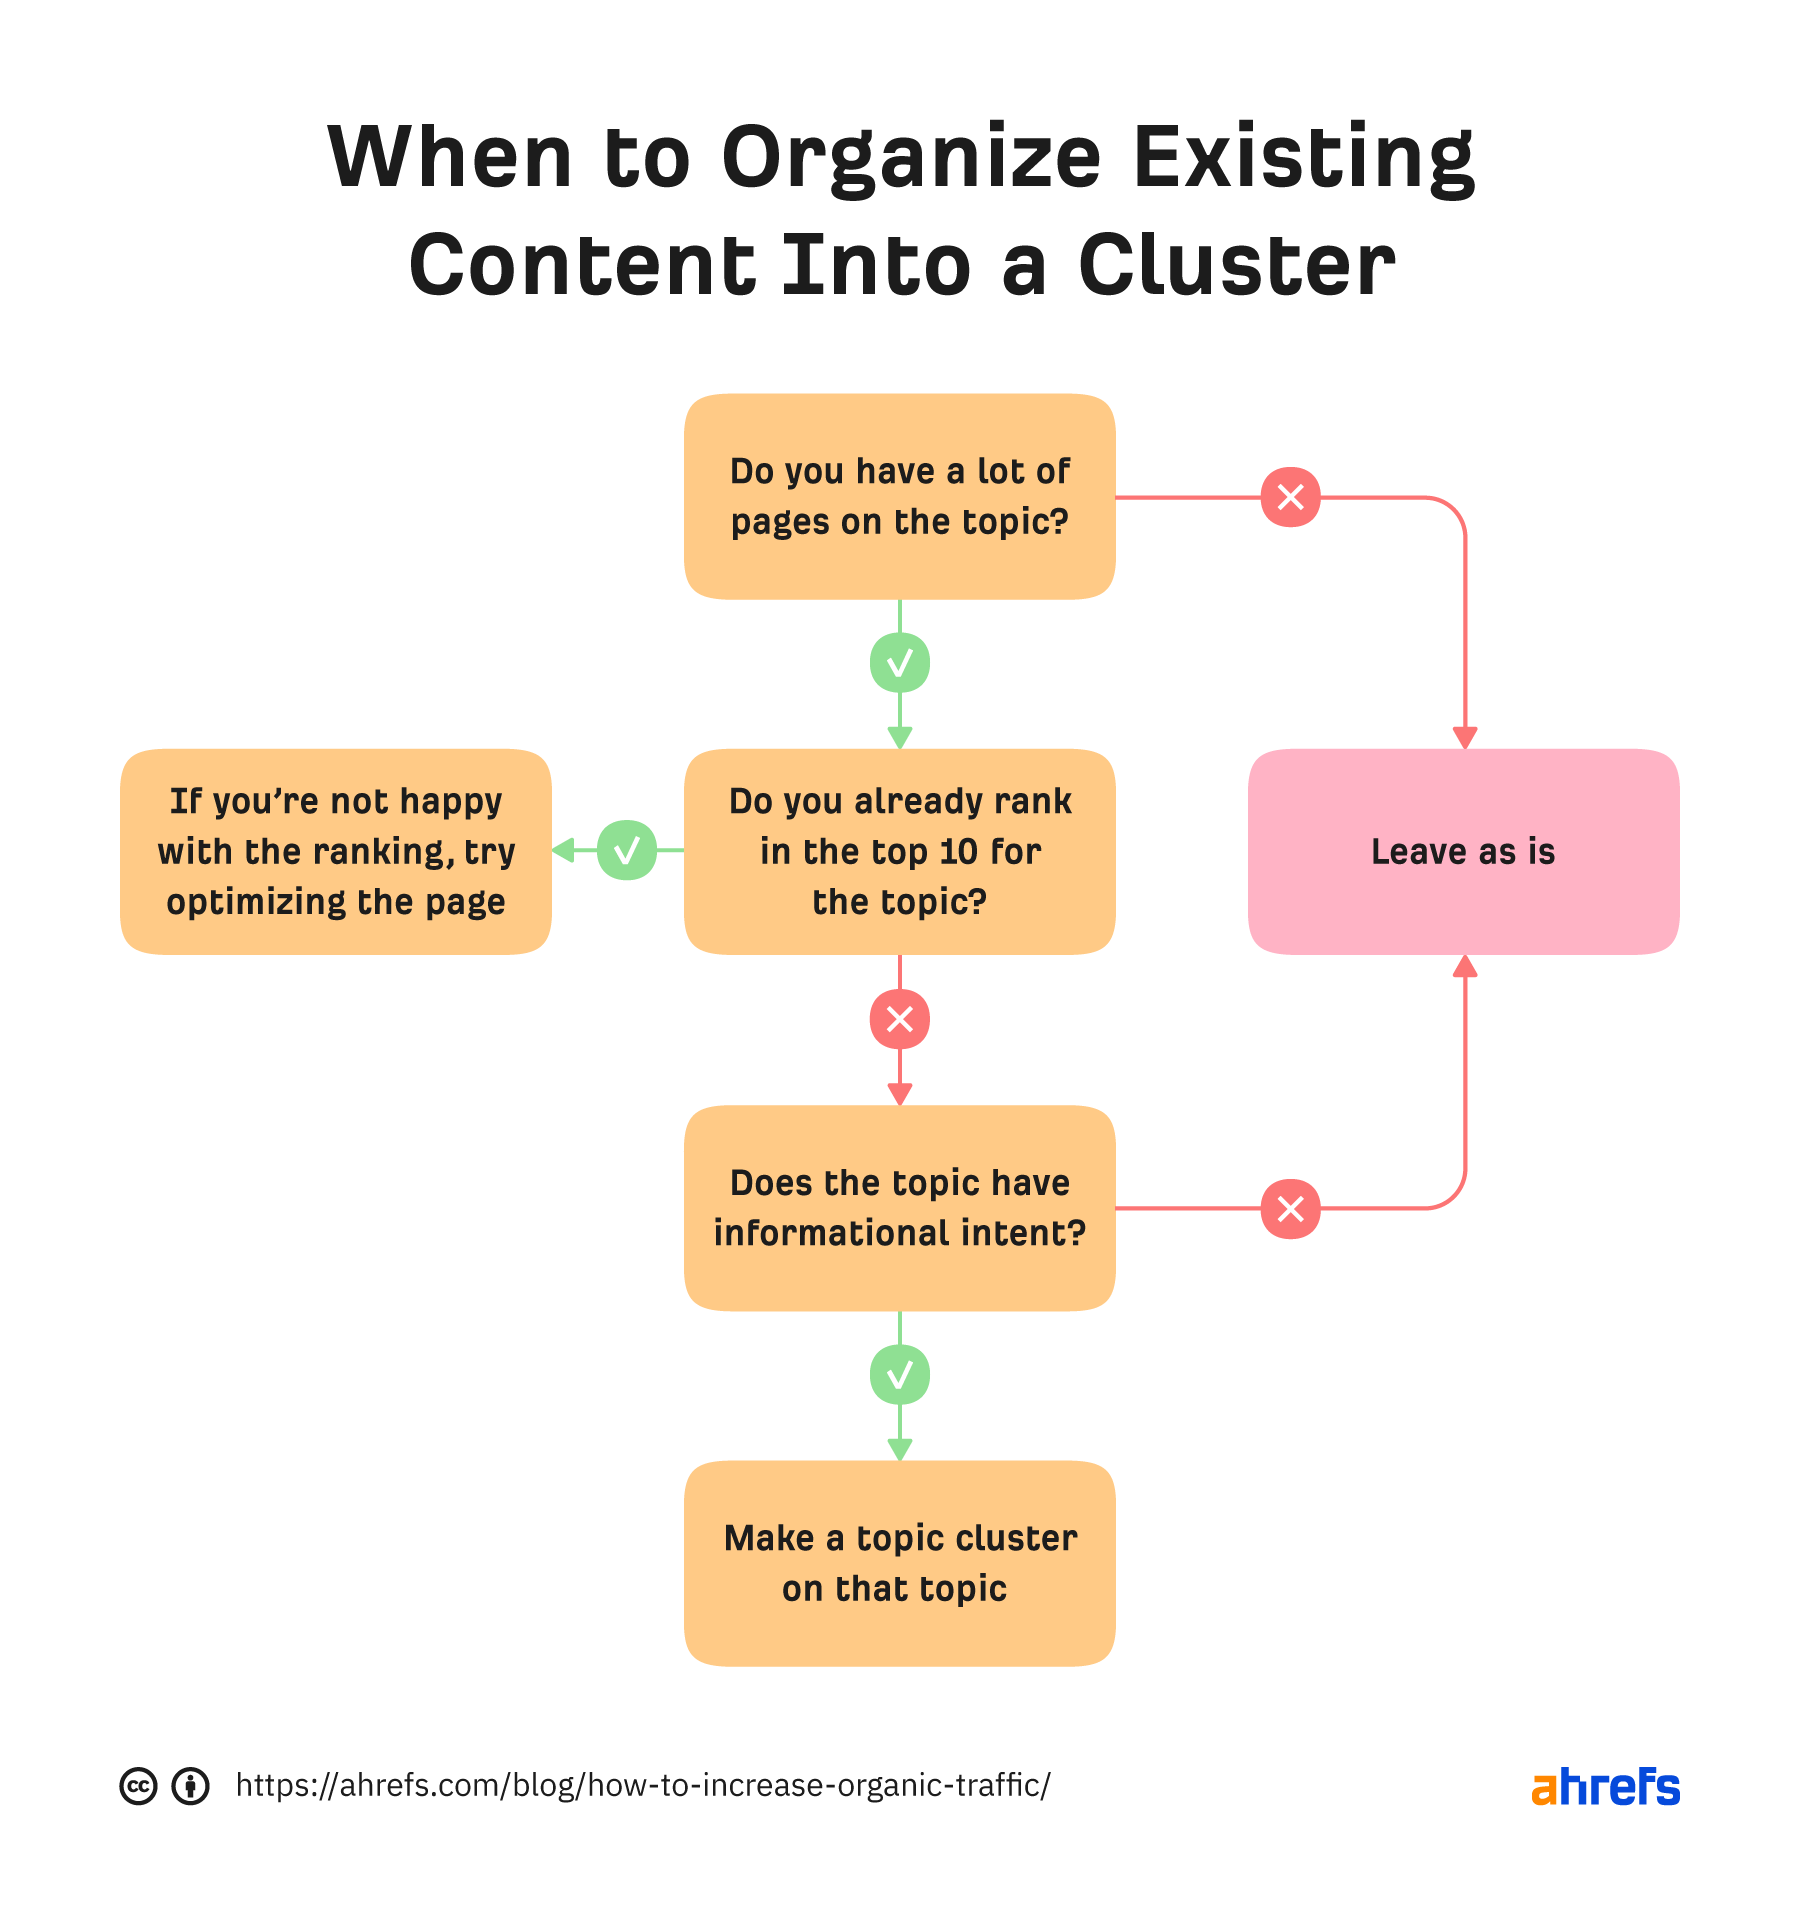 When to organize existing content into a cluster